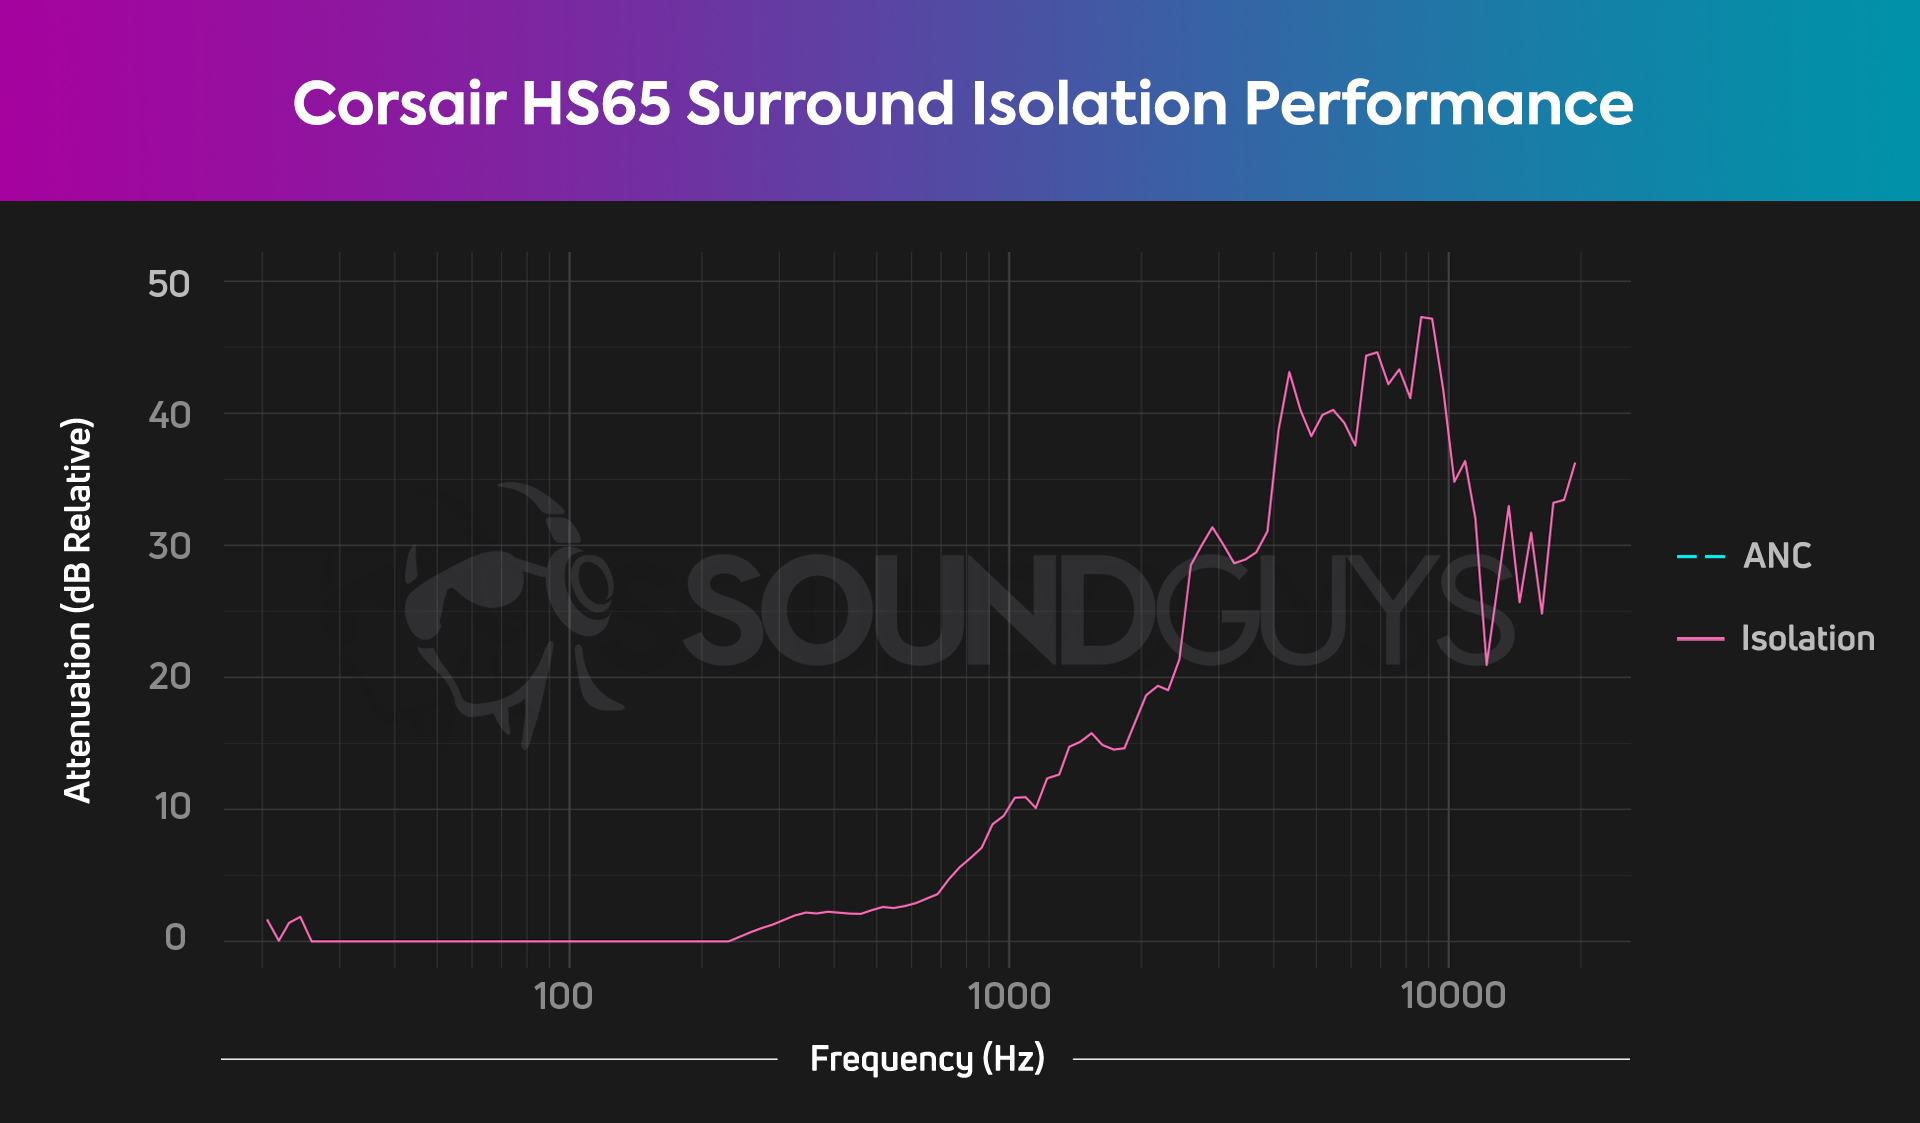 The isolation chart for the Corsair HS65 Surround, showing poor isolation below 1kHz.